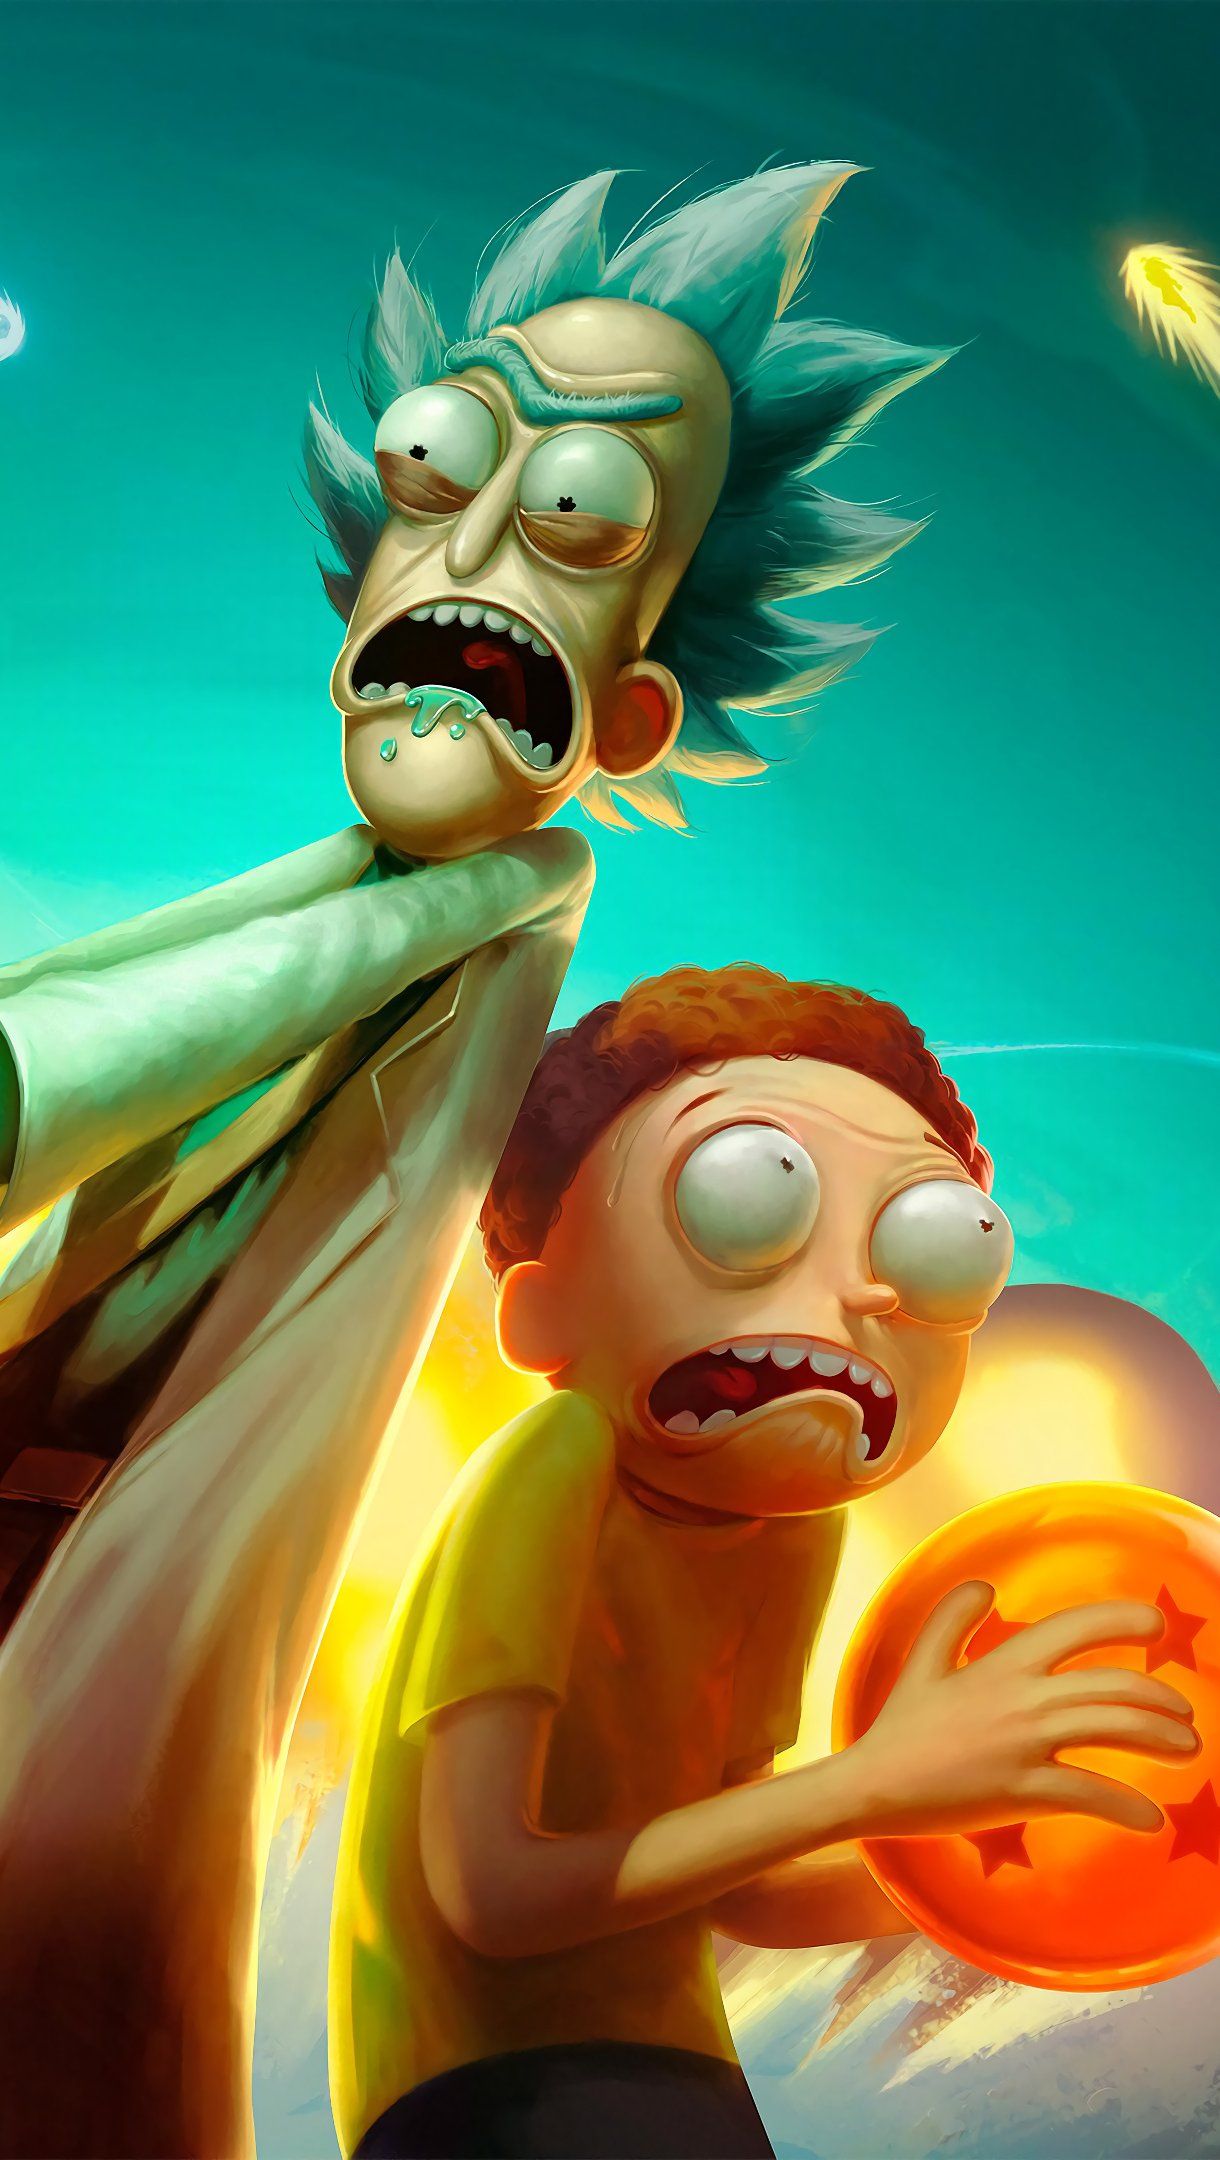 Adult Swim drops anime-inspired (and very blood) Rick and Morty short |  SYFY WIRE